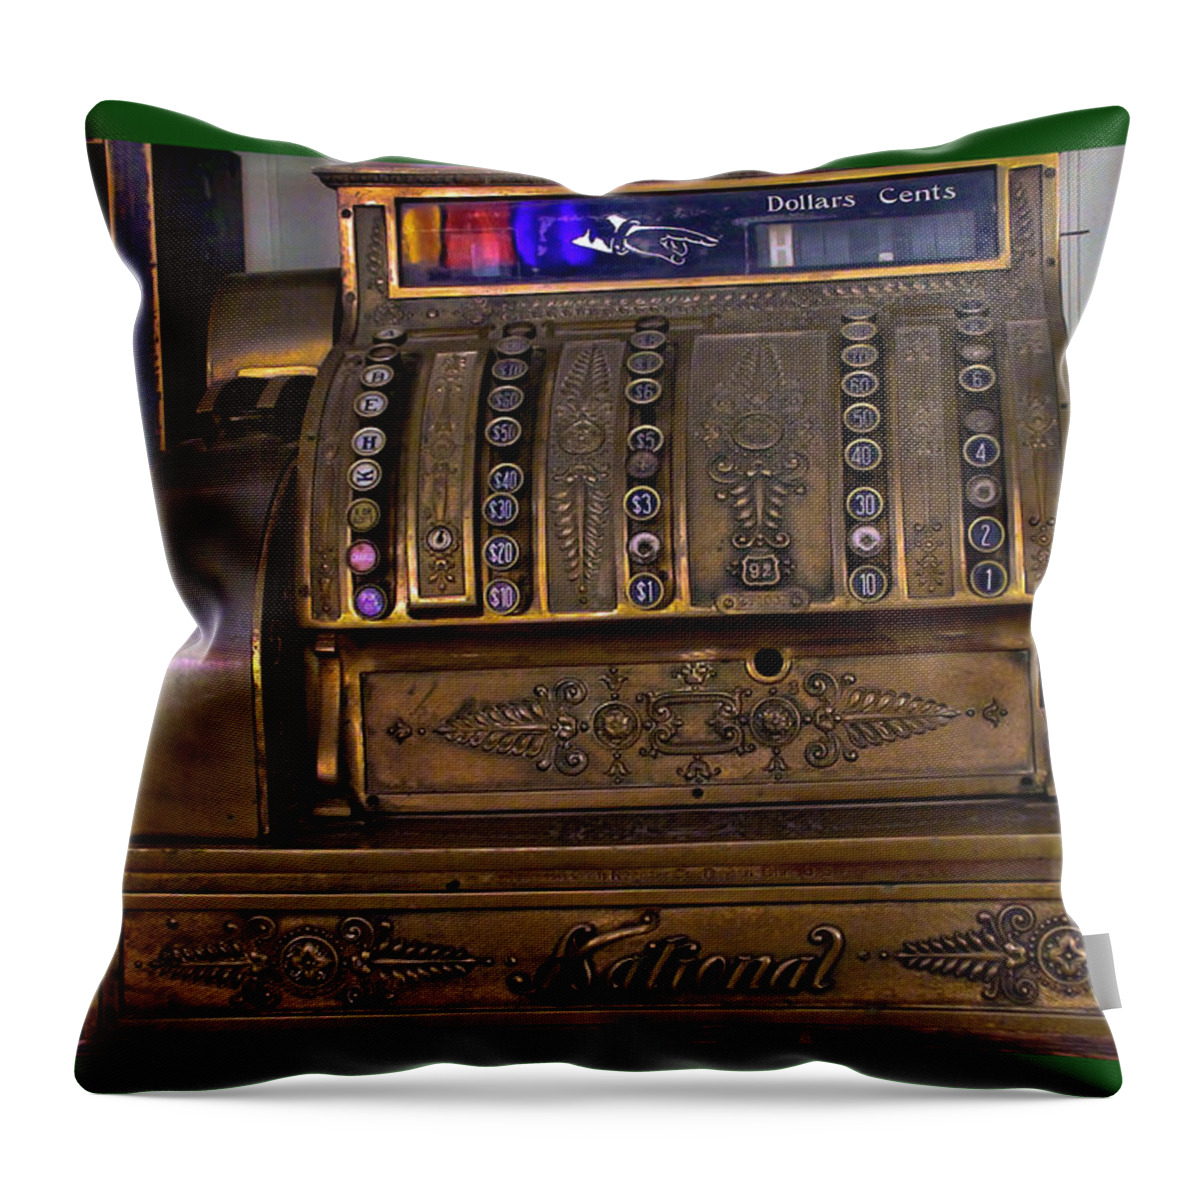 Copper Throw Pillow featuring the photograph The Old Copper Cash Machine by LeeAnn McLaneGoetz McLaneGoetzStudioLLCcom